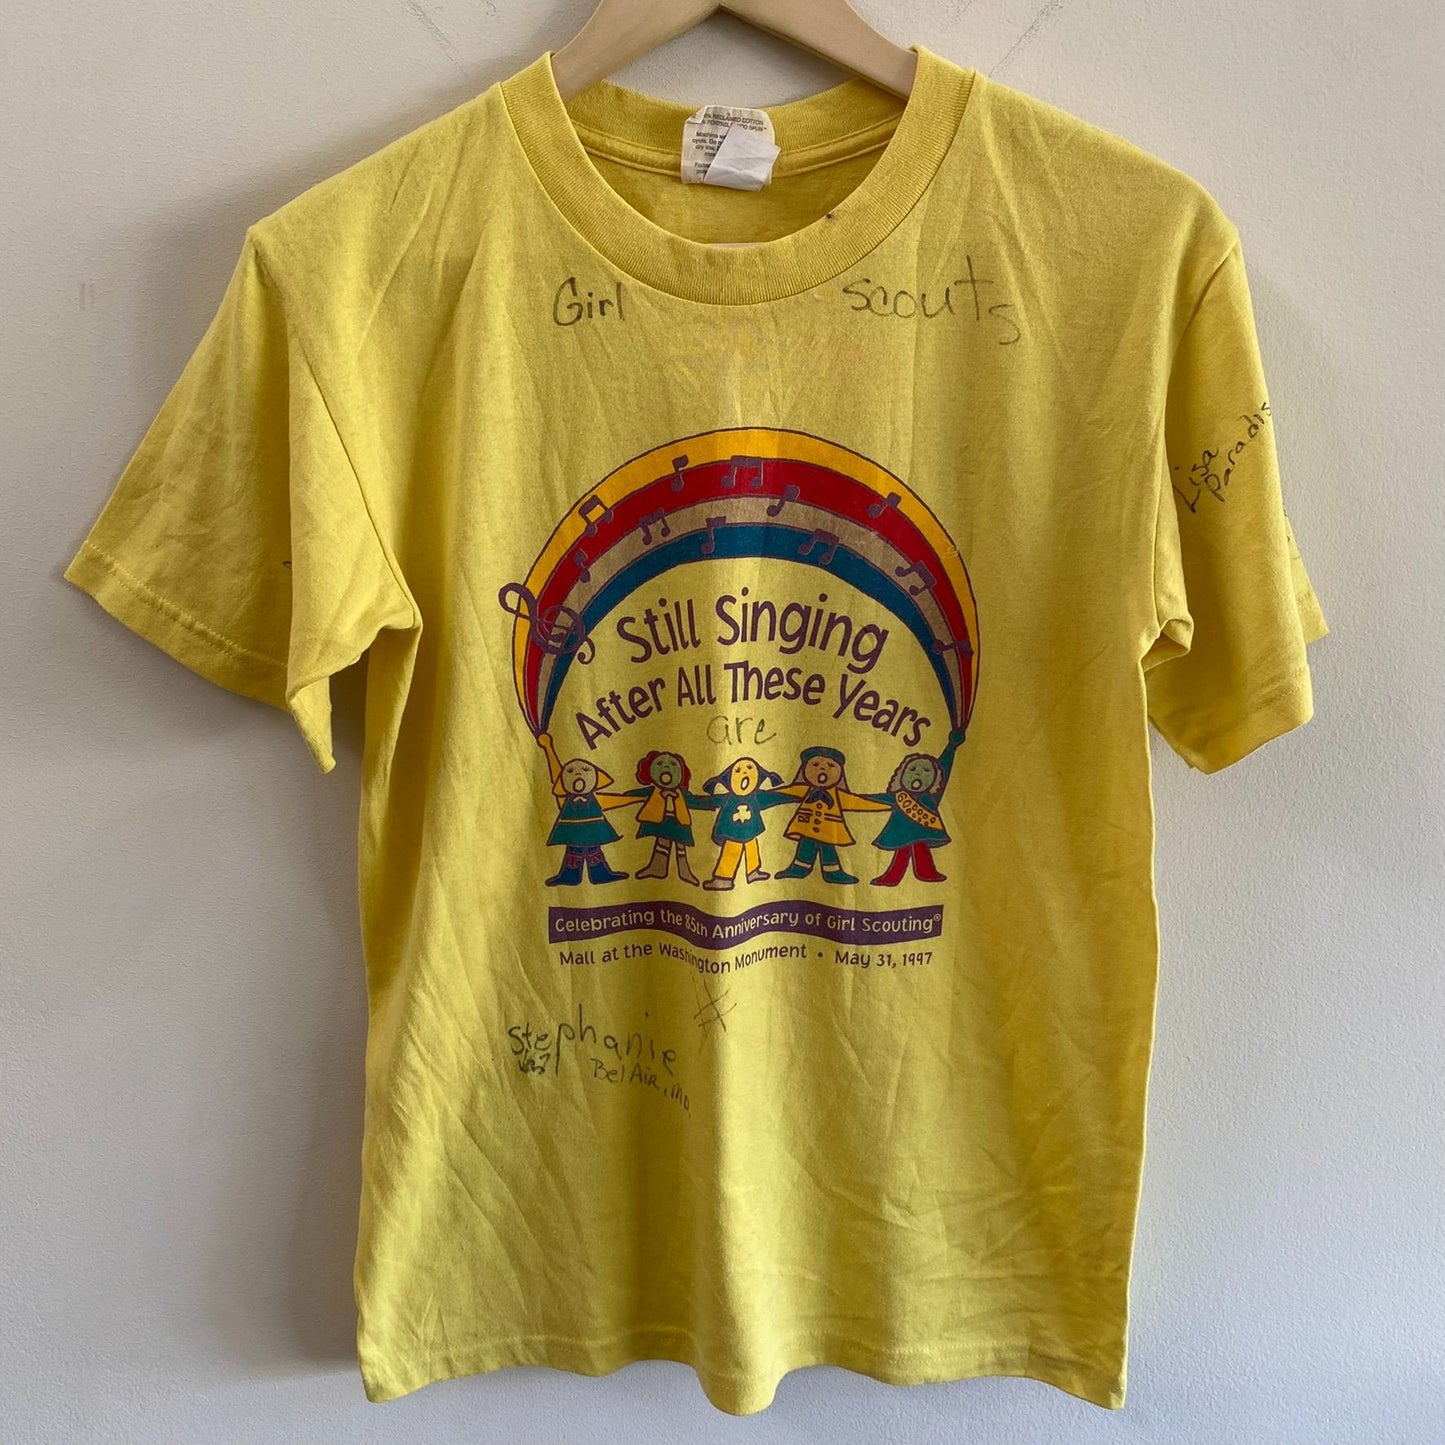 Vintage Signed Girl Scouts Tee